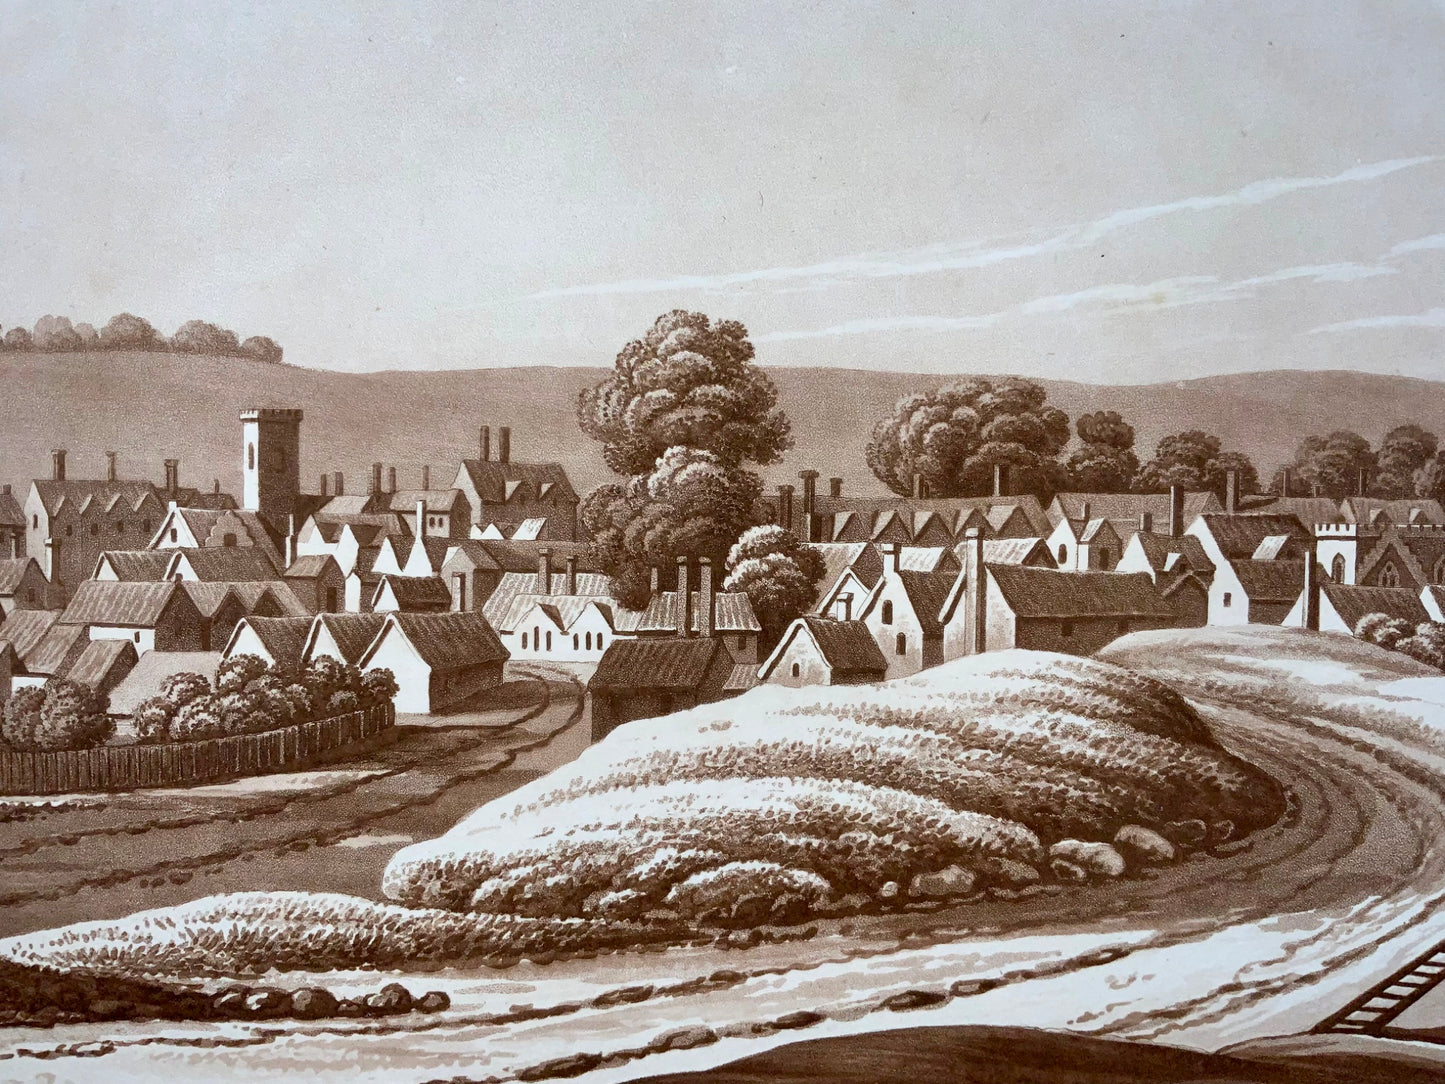 1821 Newmarket, Cambridgeshire, Sepia aquatint by Mawman after Shepherd, topography, travel